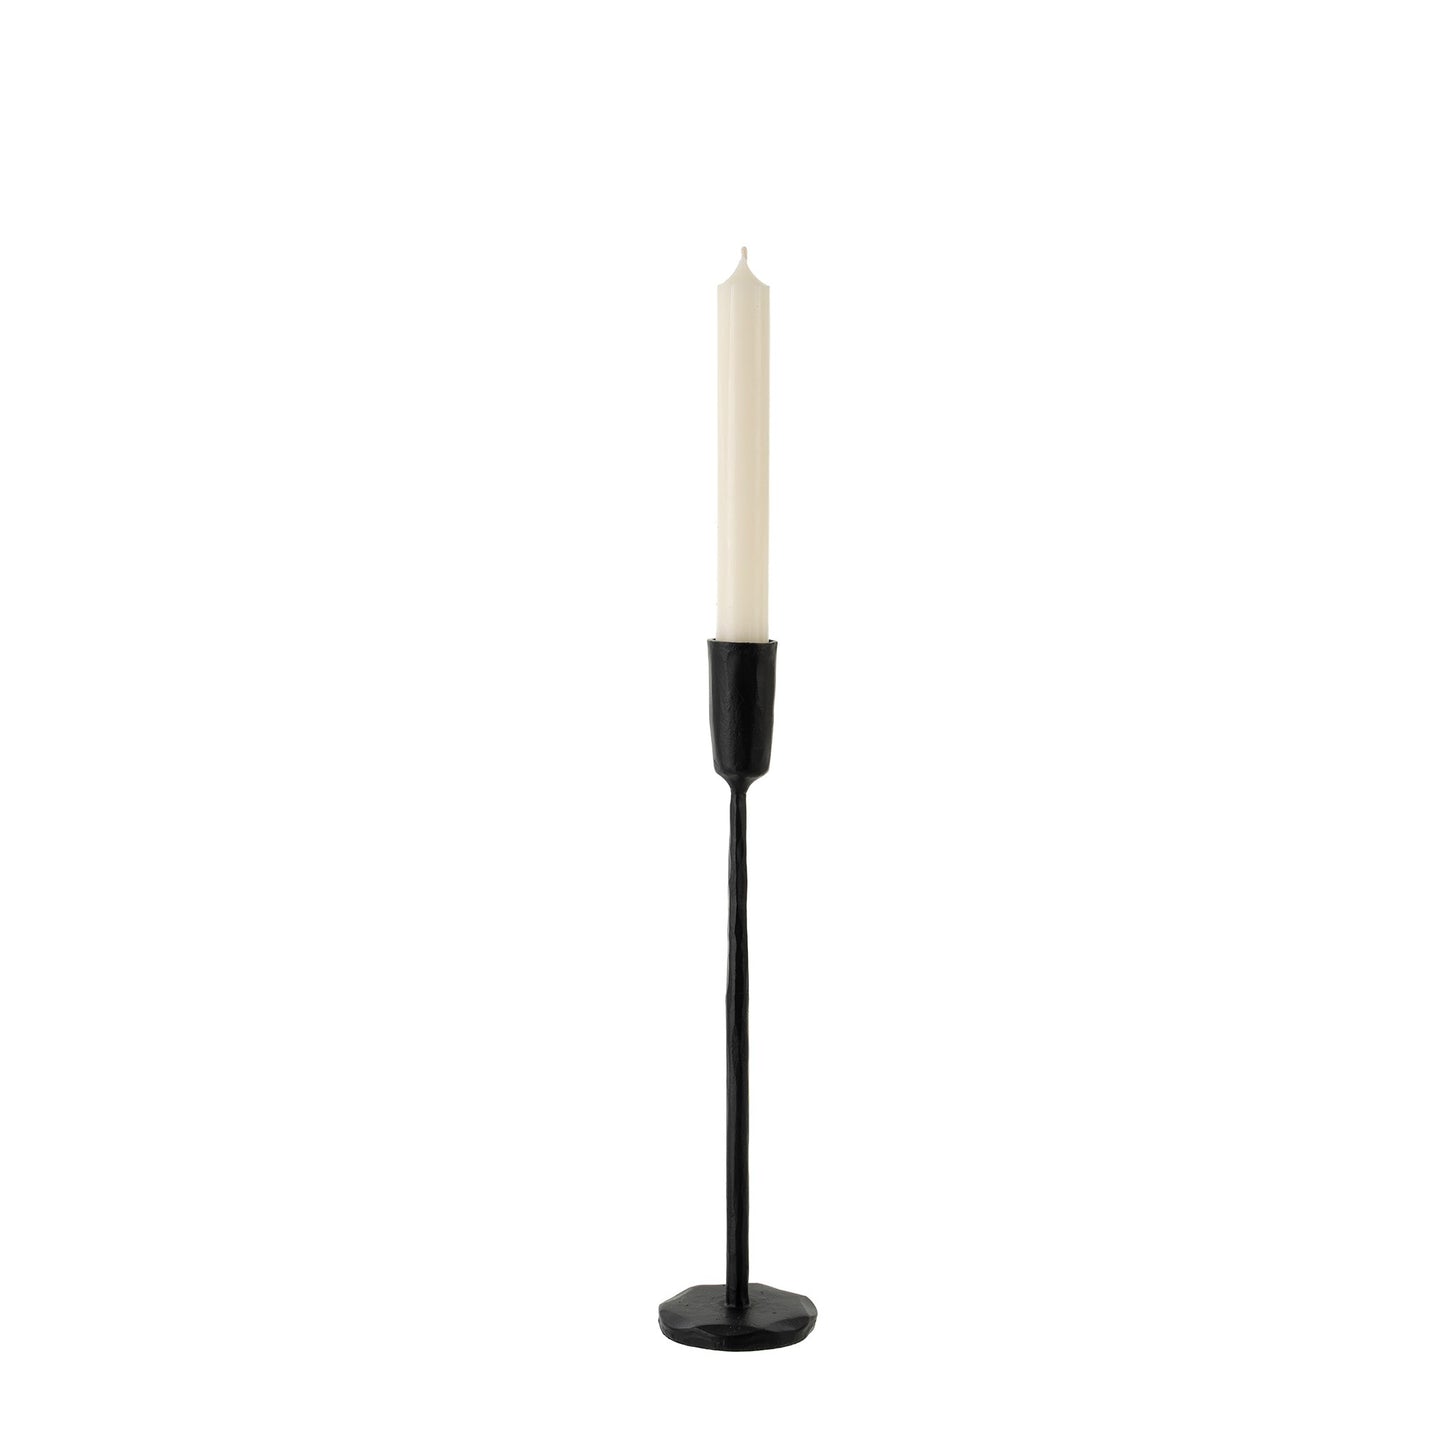 BLACK Forged Iron Candlestick